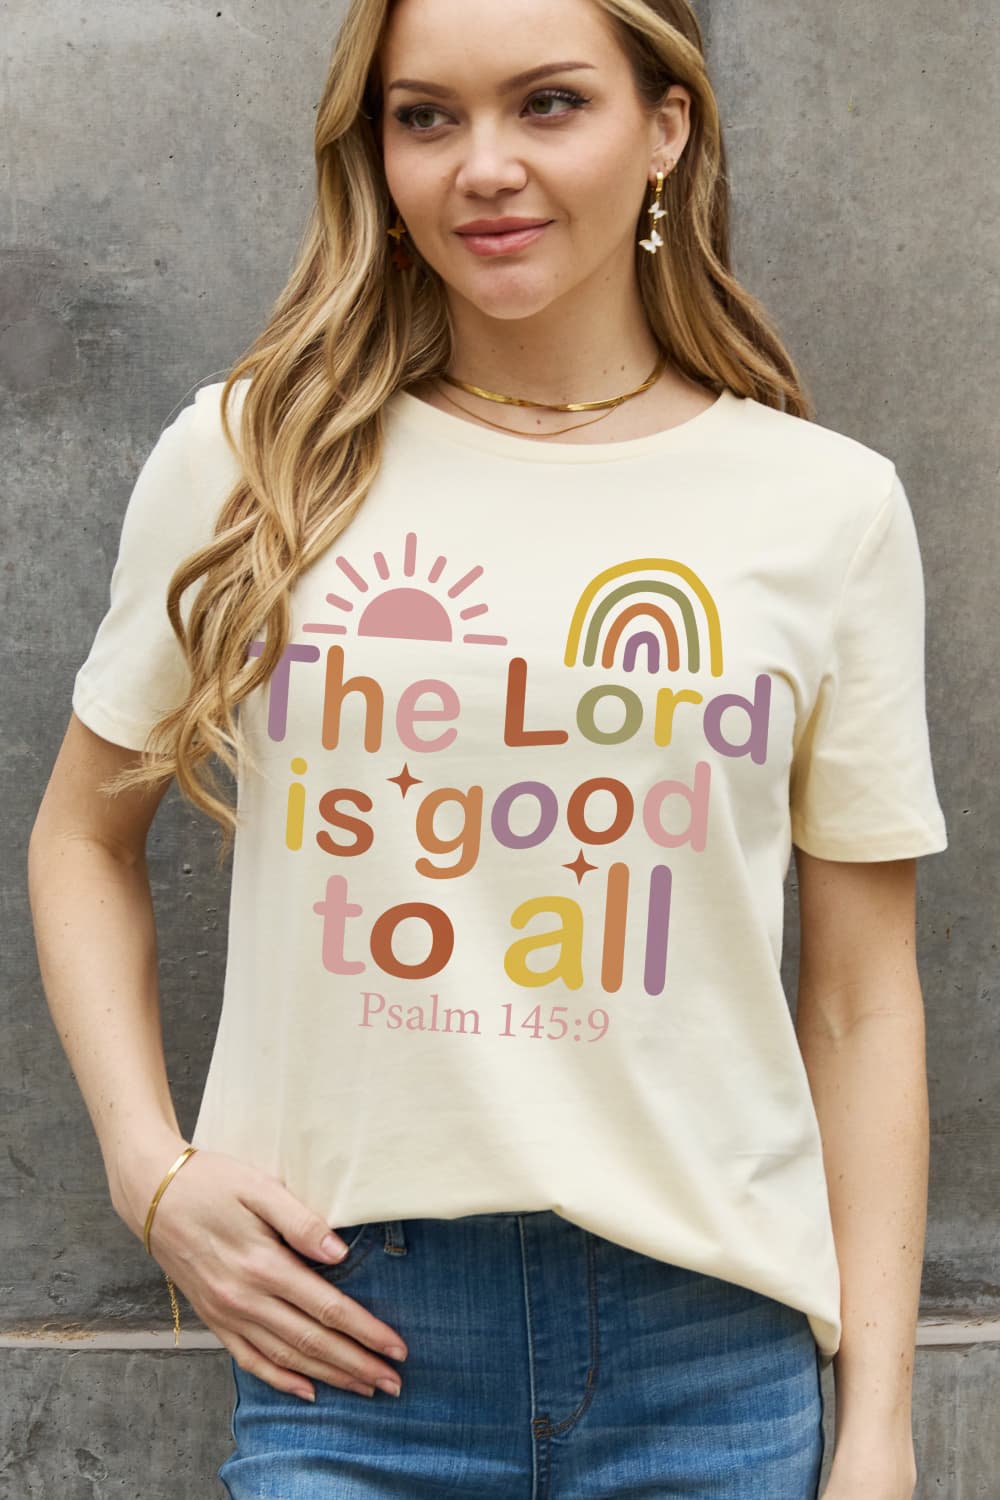 Full Size THE LORD IS GOOD TO ALL PSALM 145:9 Graphic Cotton Tee